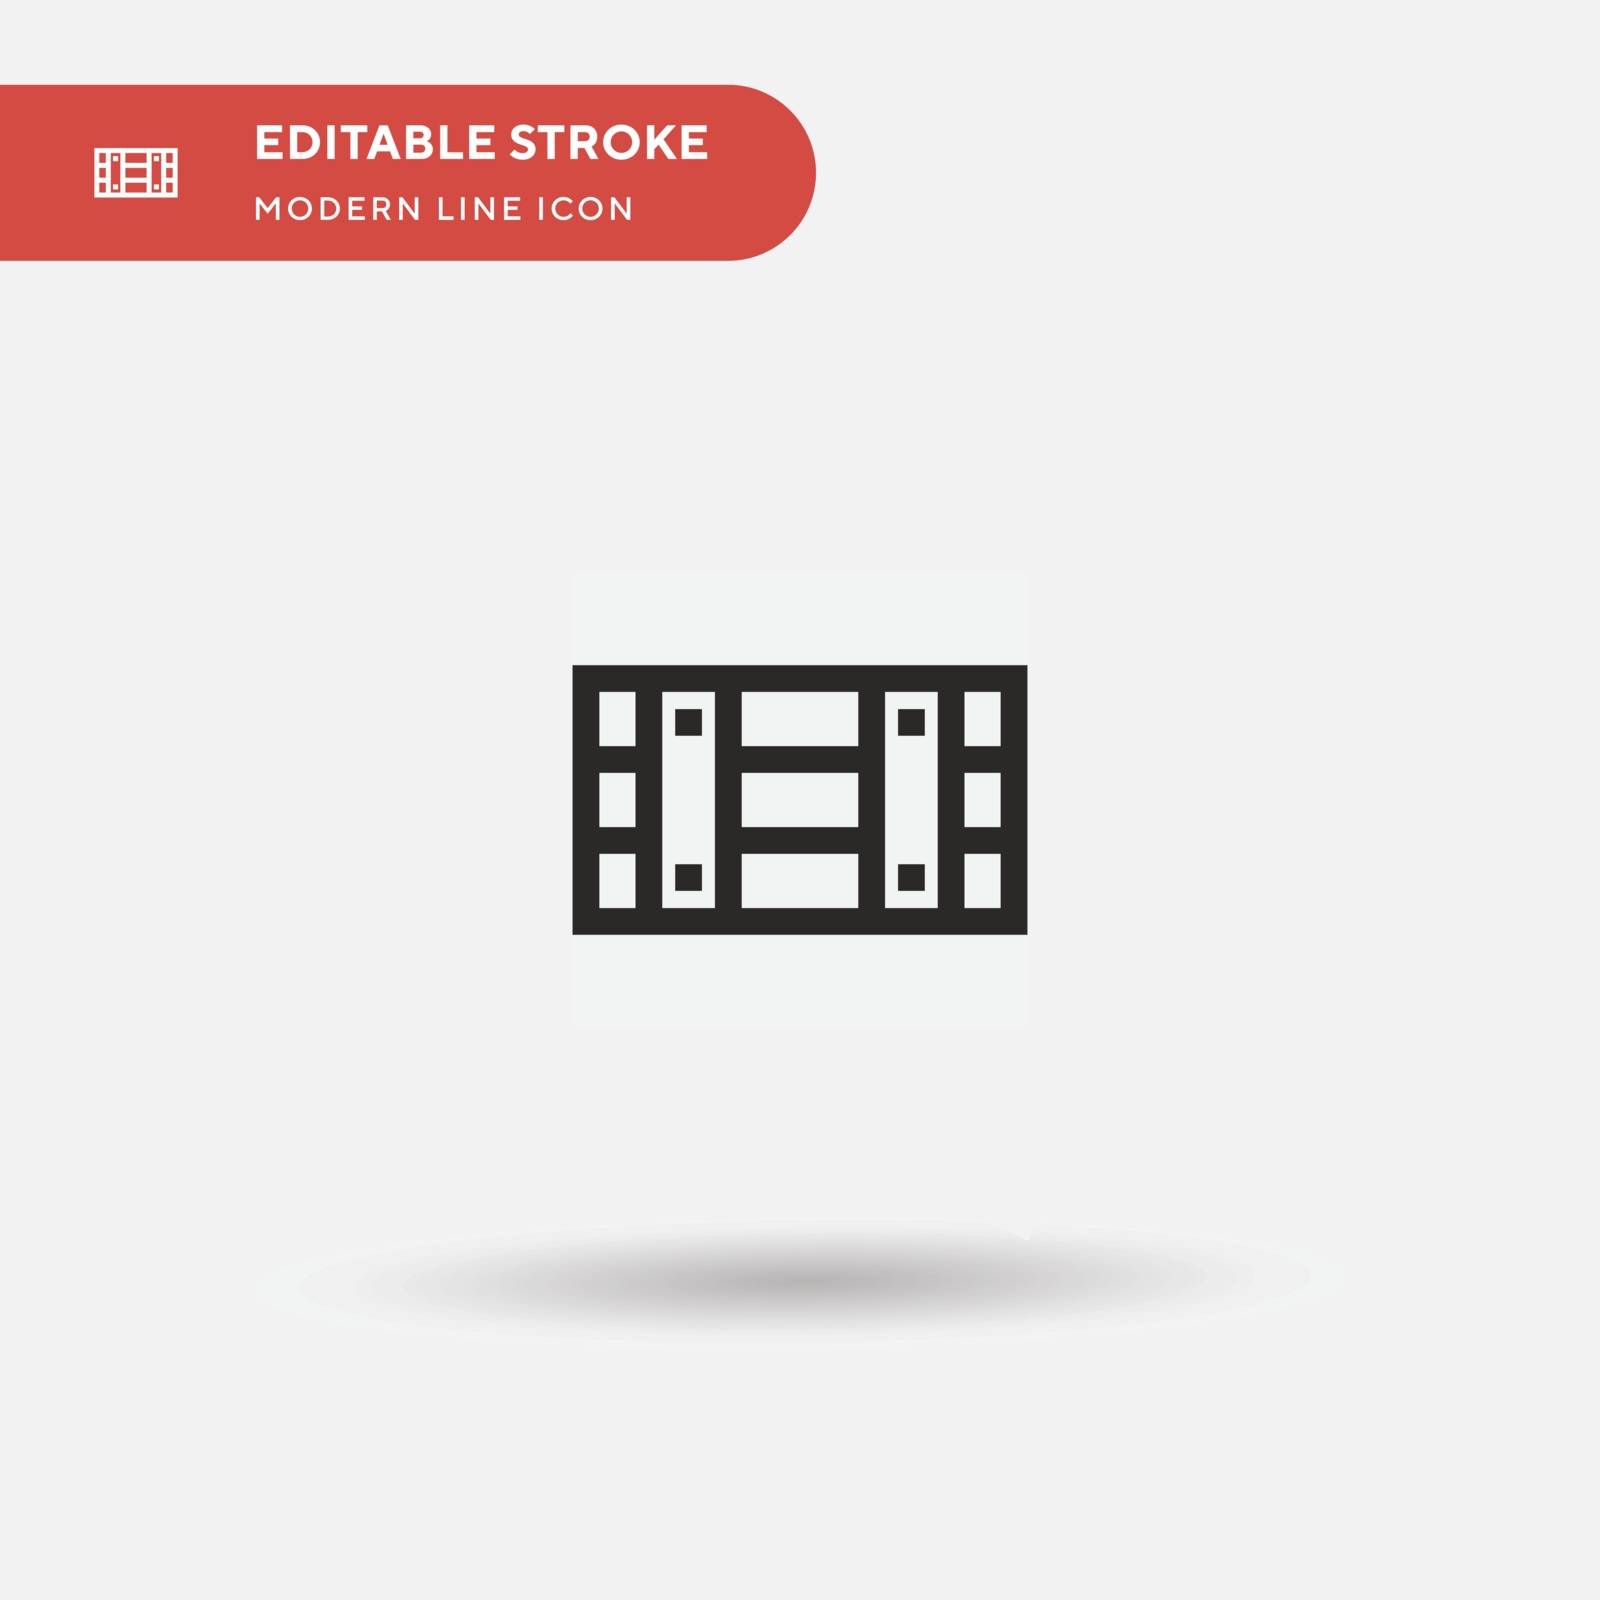 Wooden Crate Simple vector icon. Illustration symbol design temp by guapoo